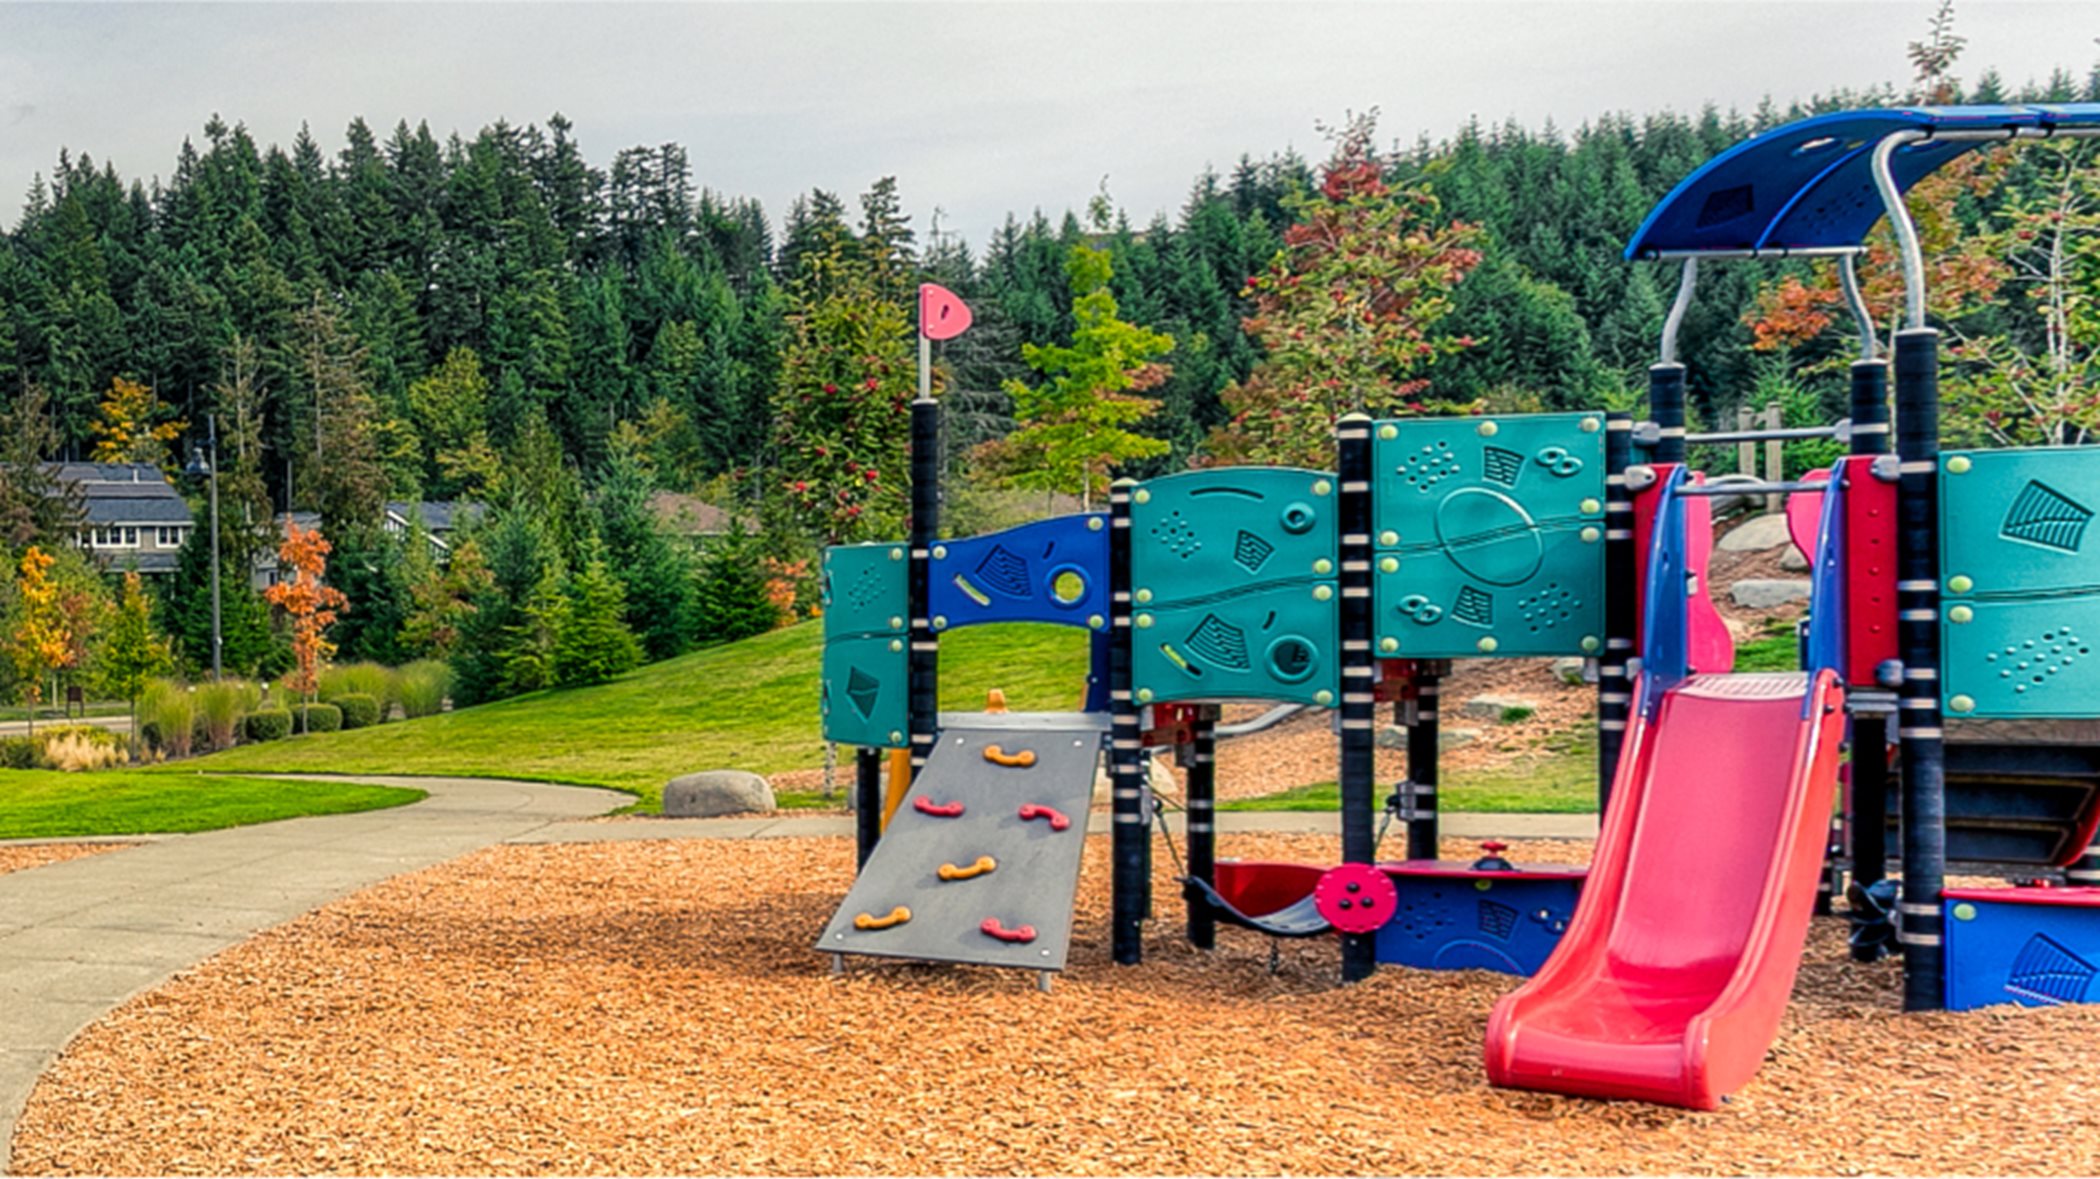 tot lot playground structure with slide